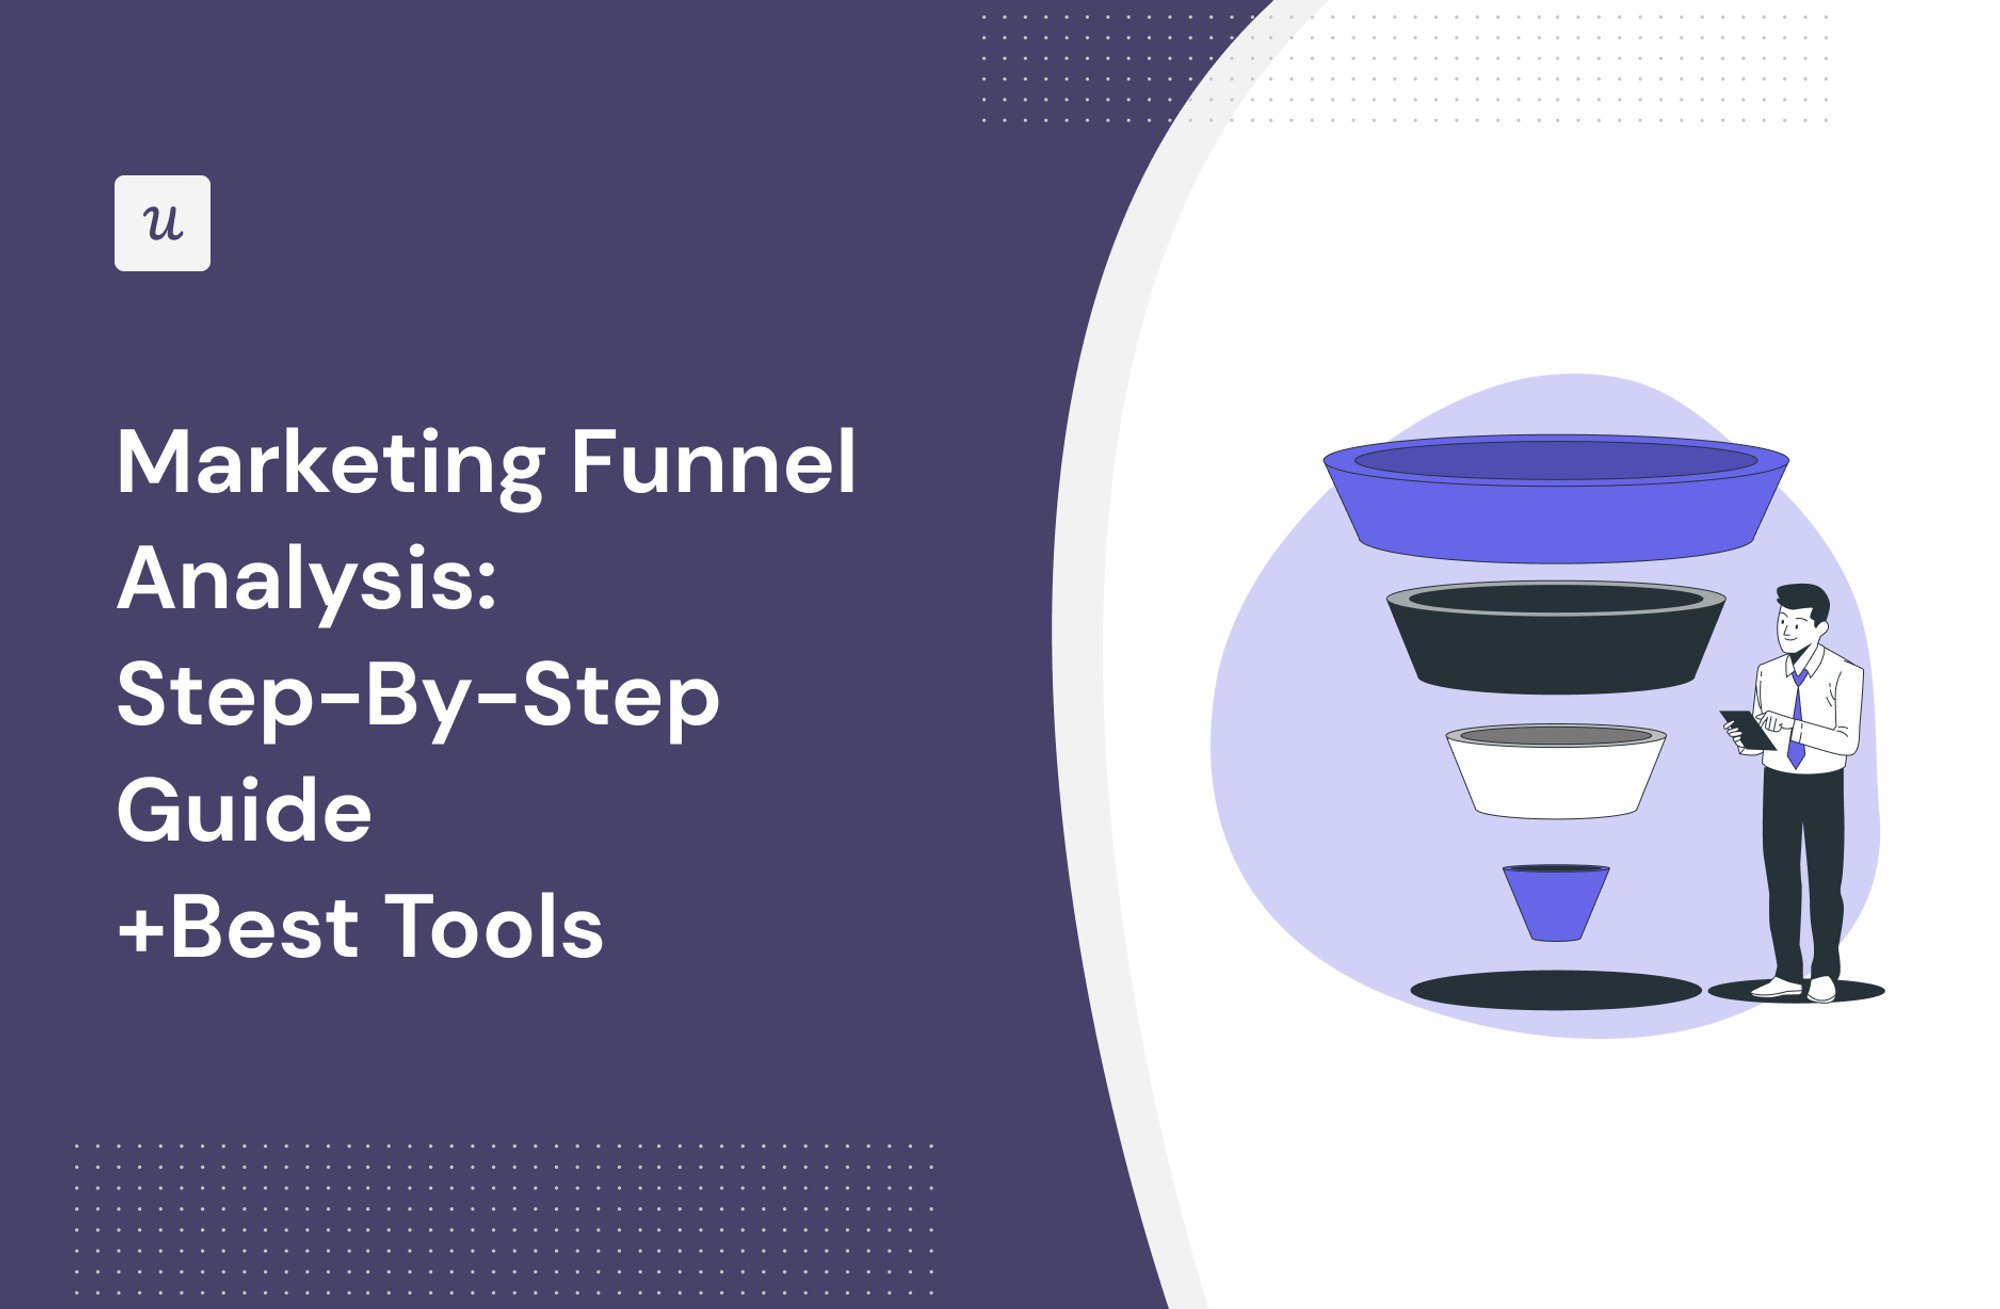 Marketing Funnel Analysis: Step-By-Step Guide (+Best Tools) cover